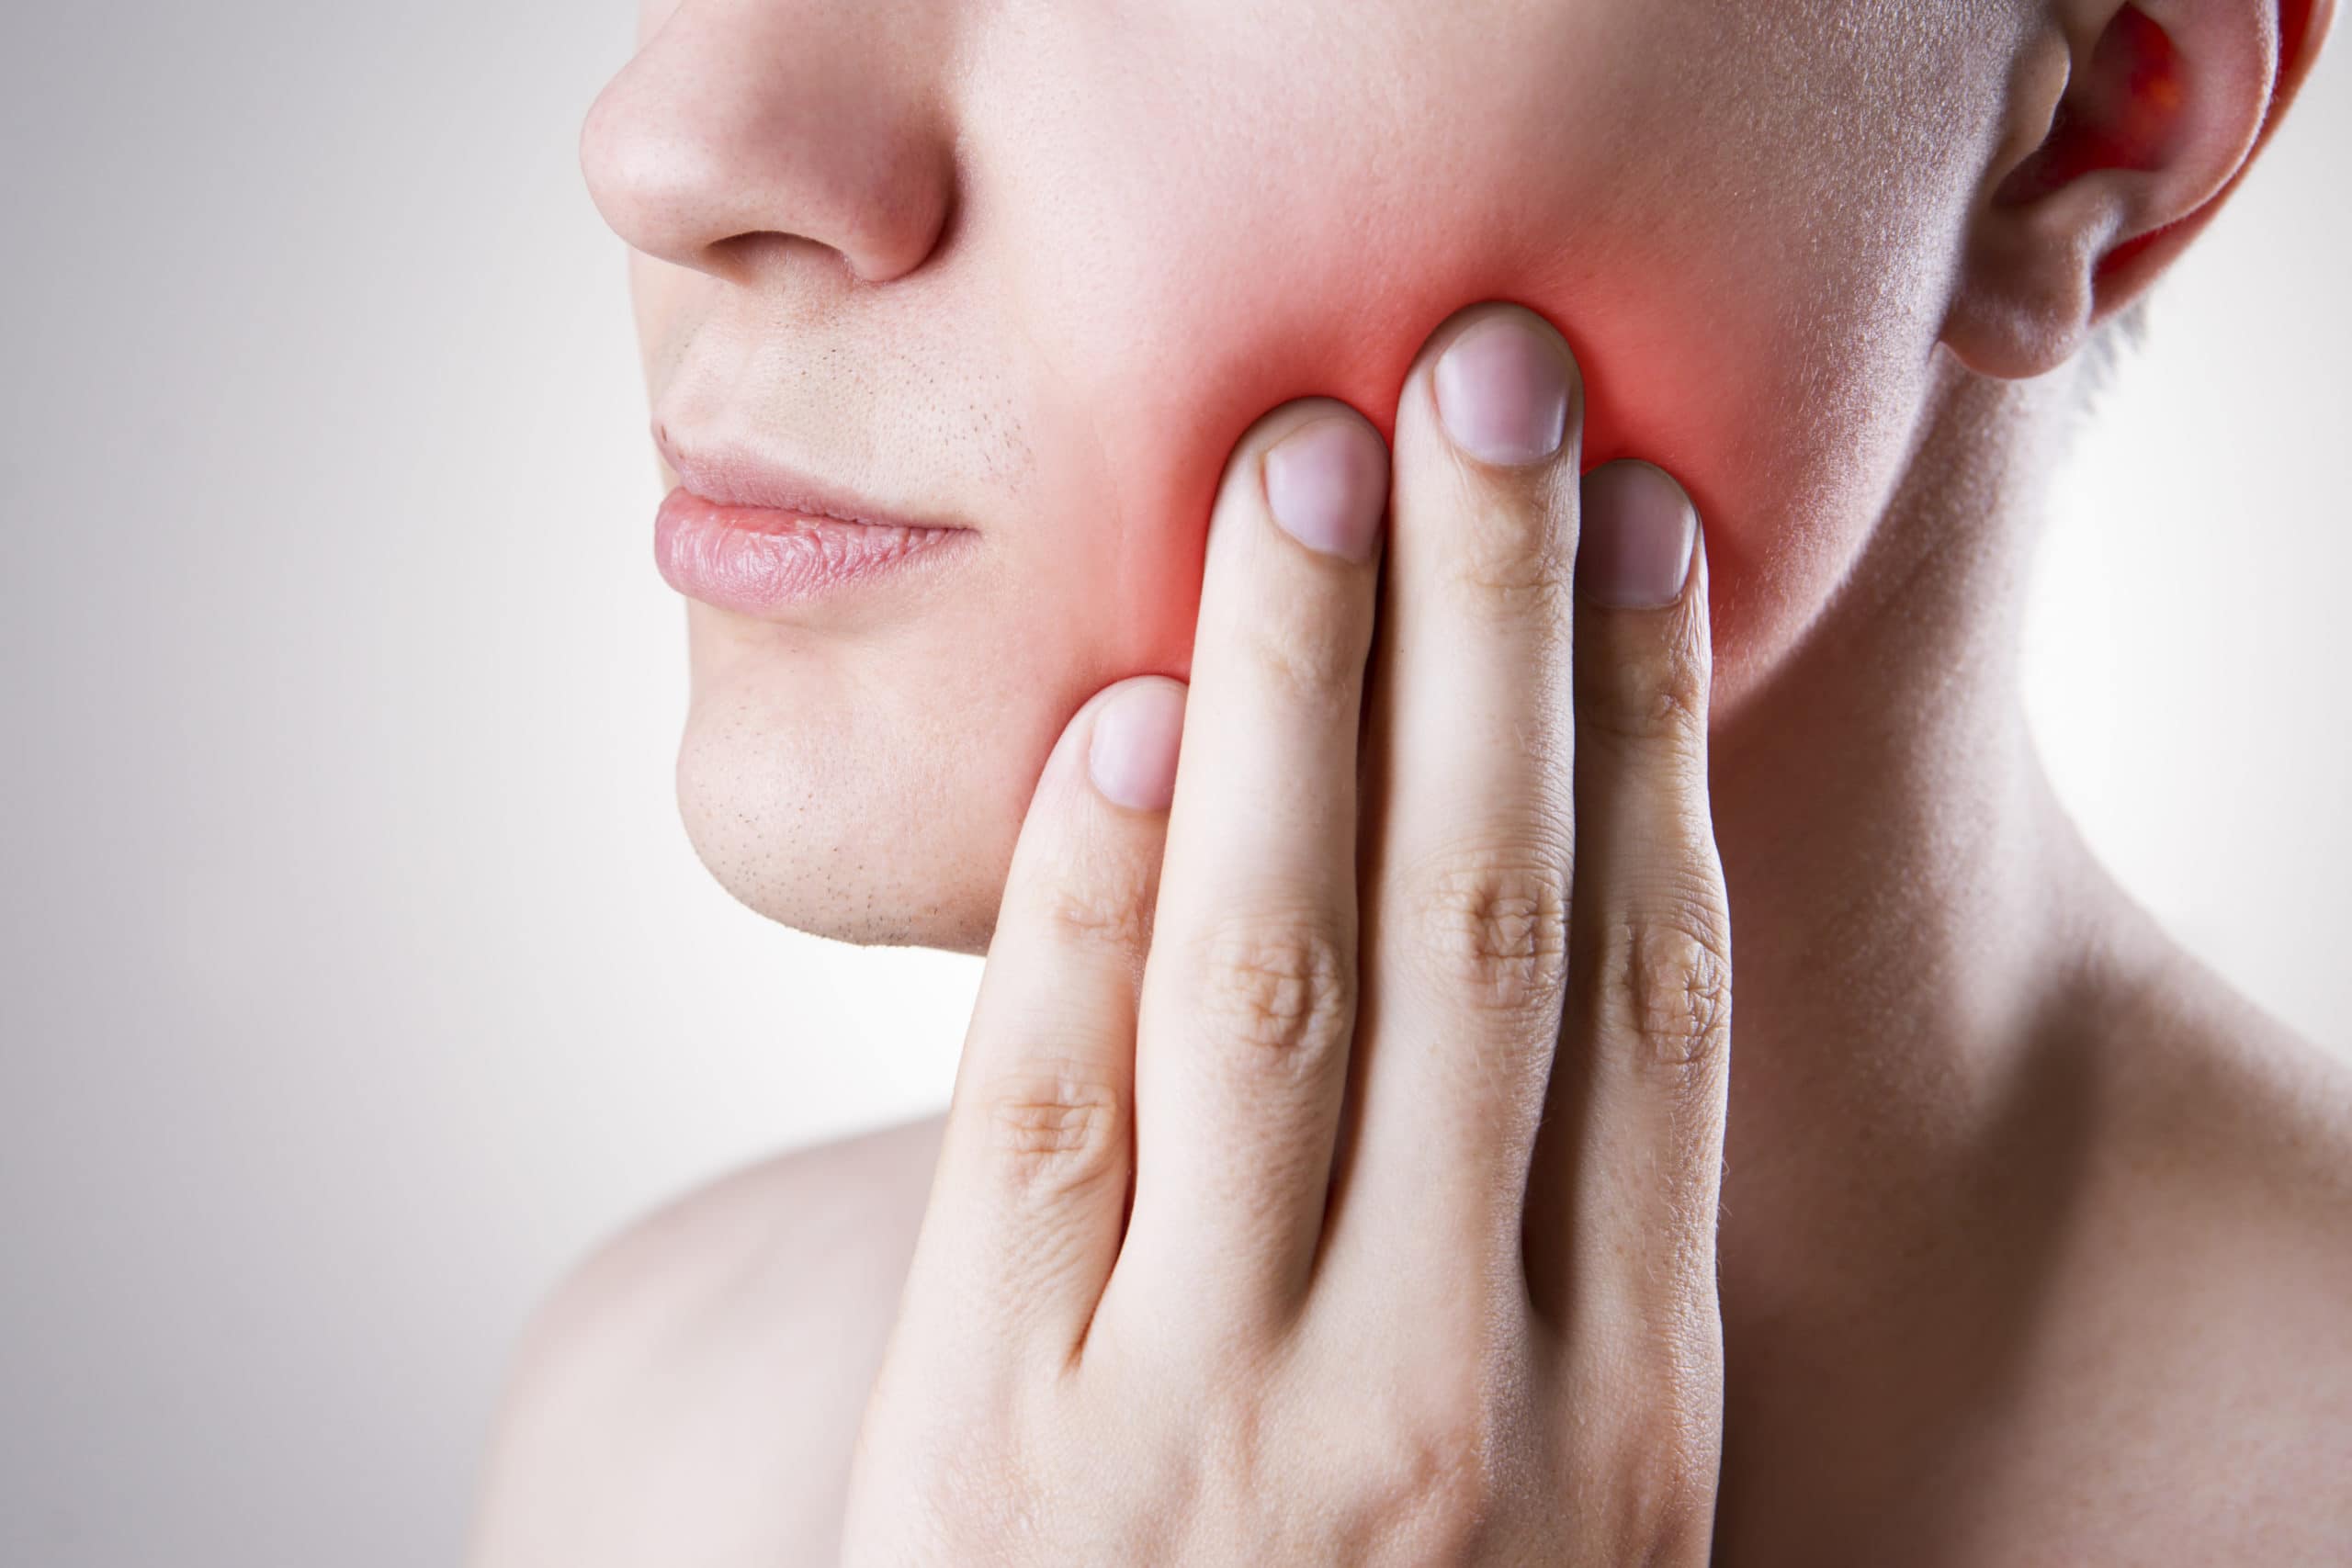 How To Reduce Swelling After Wisdom Tooth Extraction